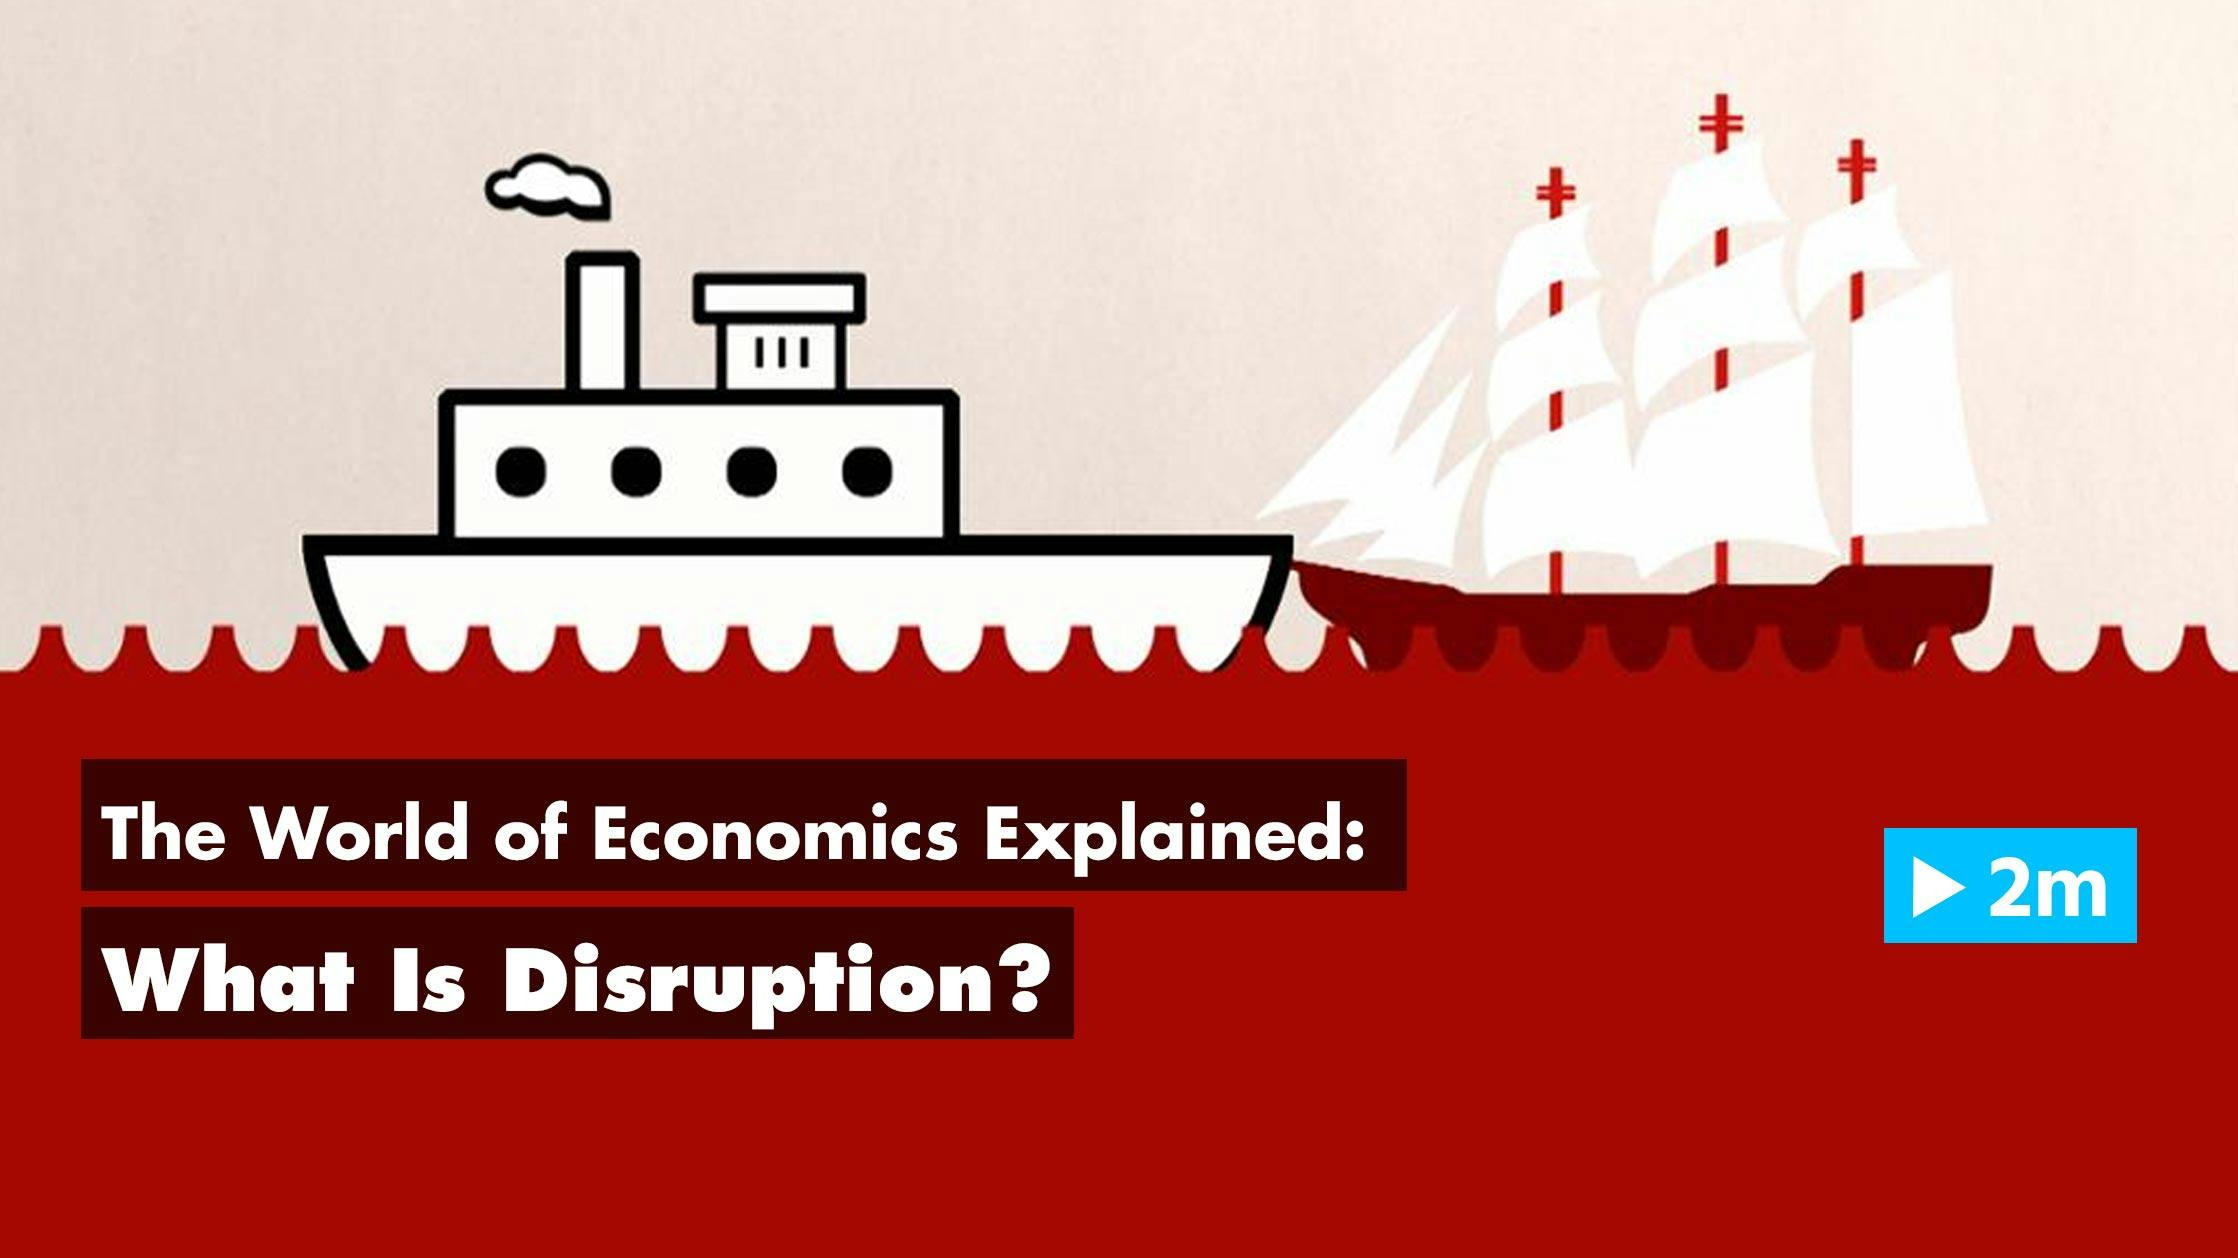 The World of Economics Explained: What is disruption?